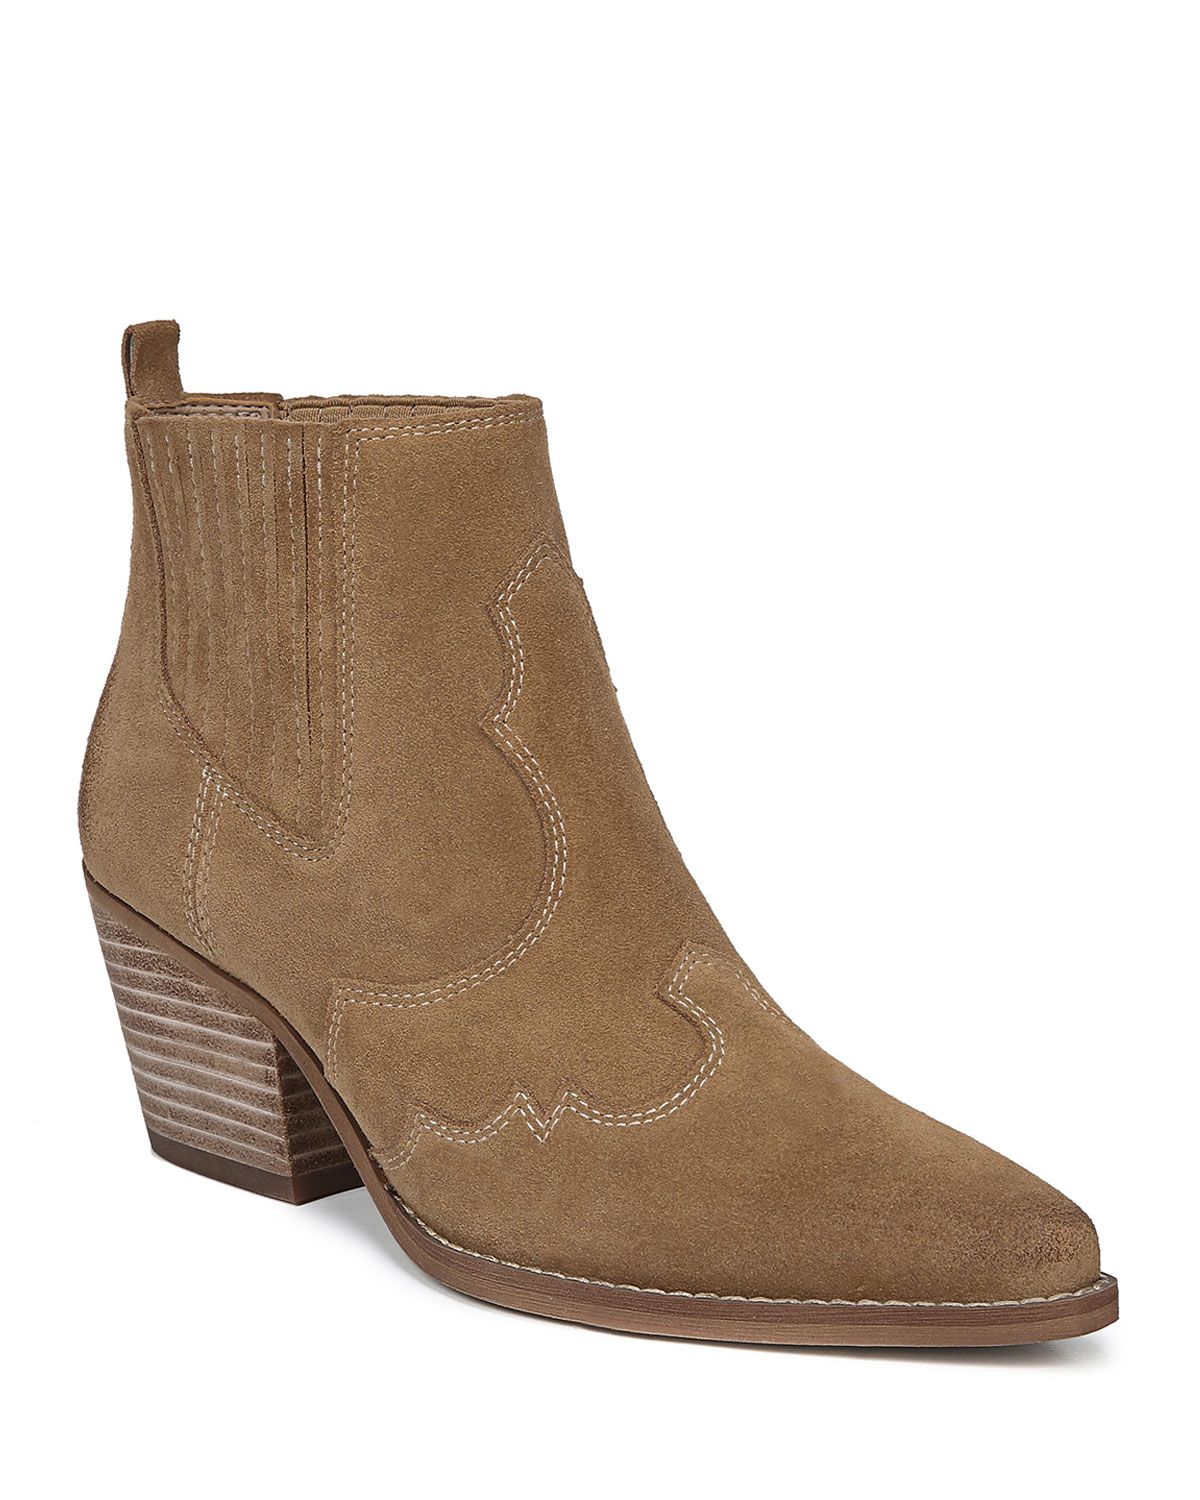 Winona Western Stitched Suede Booties | Neiman Marcus